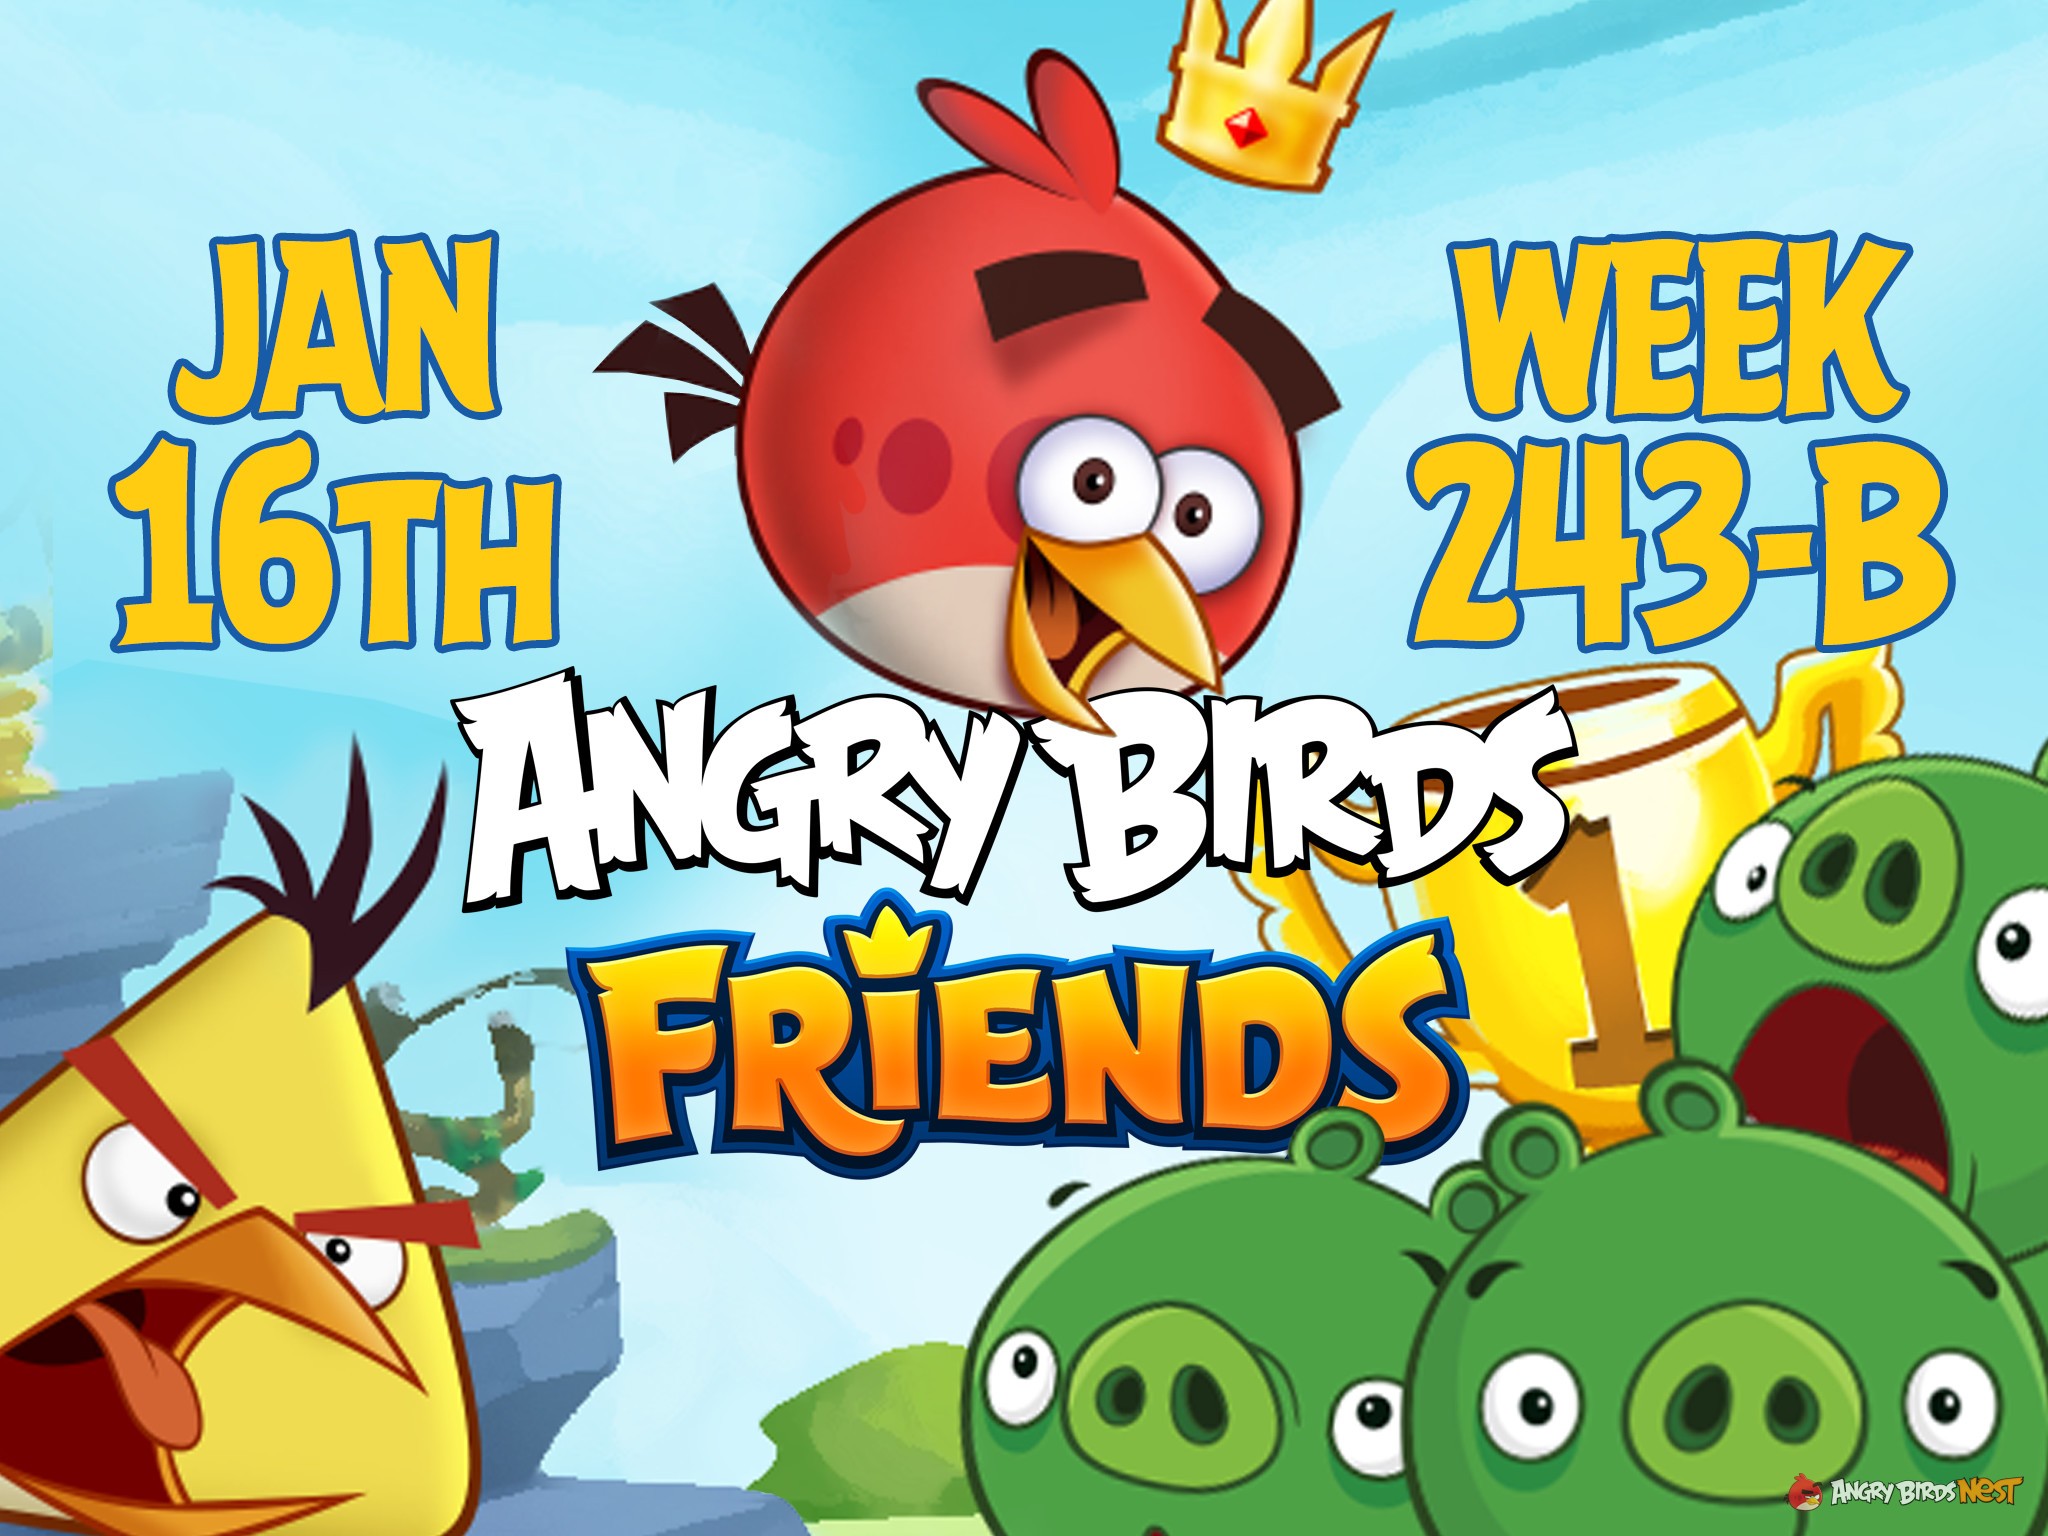 Angry Birds Friends Tournament Week 243-B Feature Image